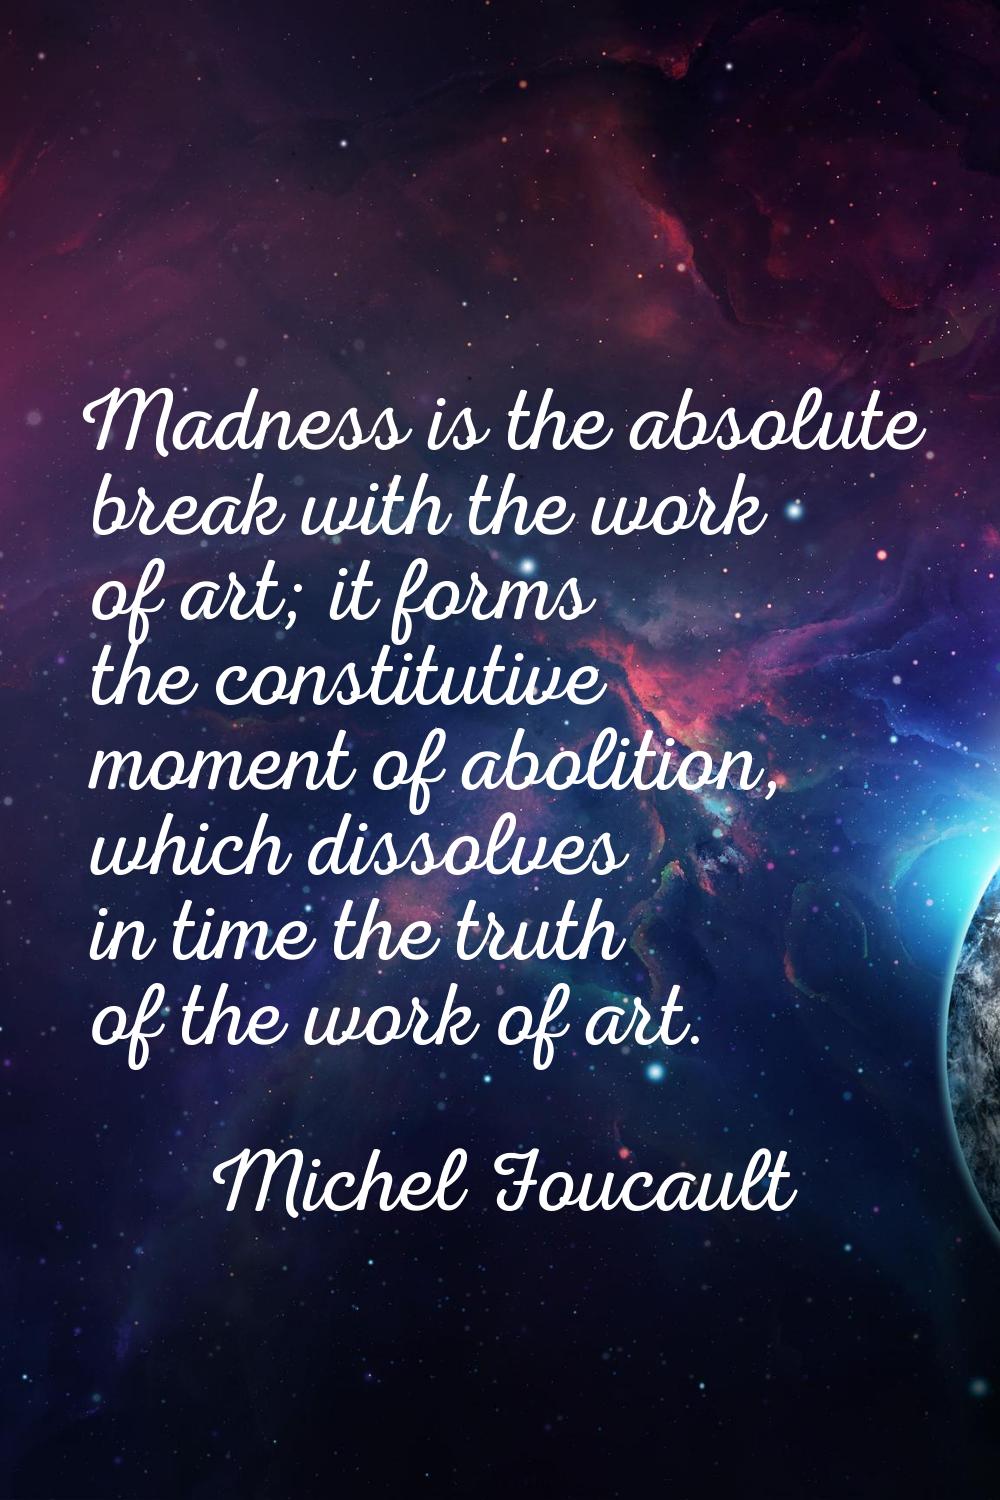 Madness is the absolute break with the work of art; it forms the constitutive moment of abolition, 